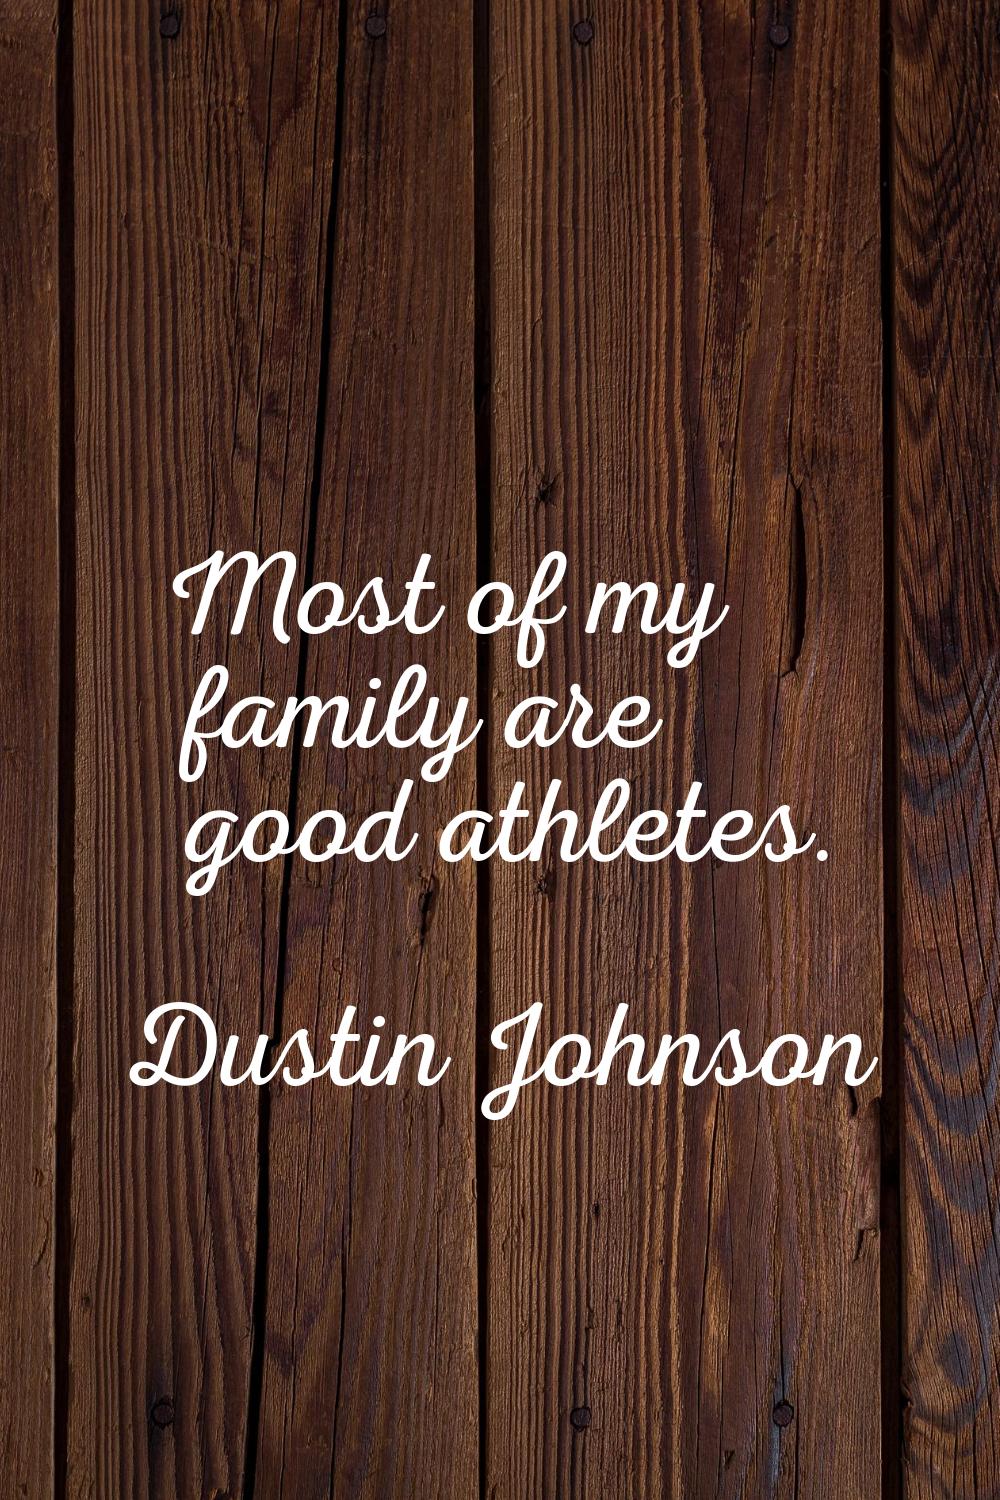 Most of my family are good athletes.